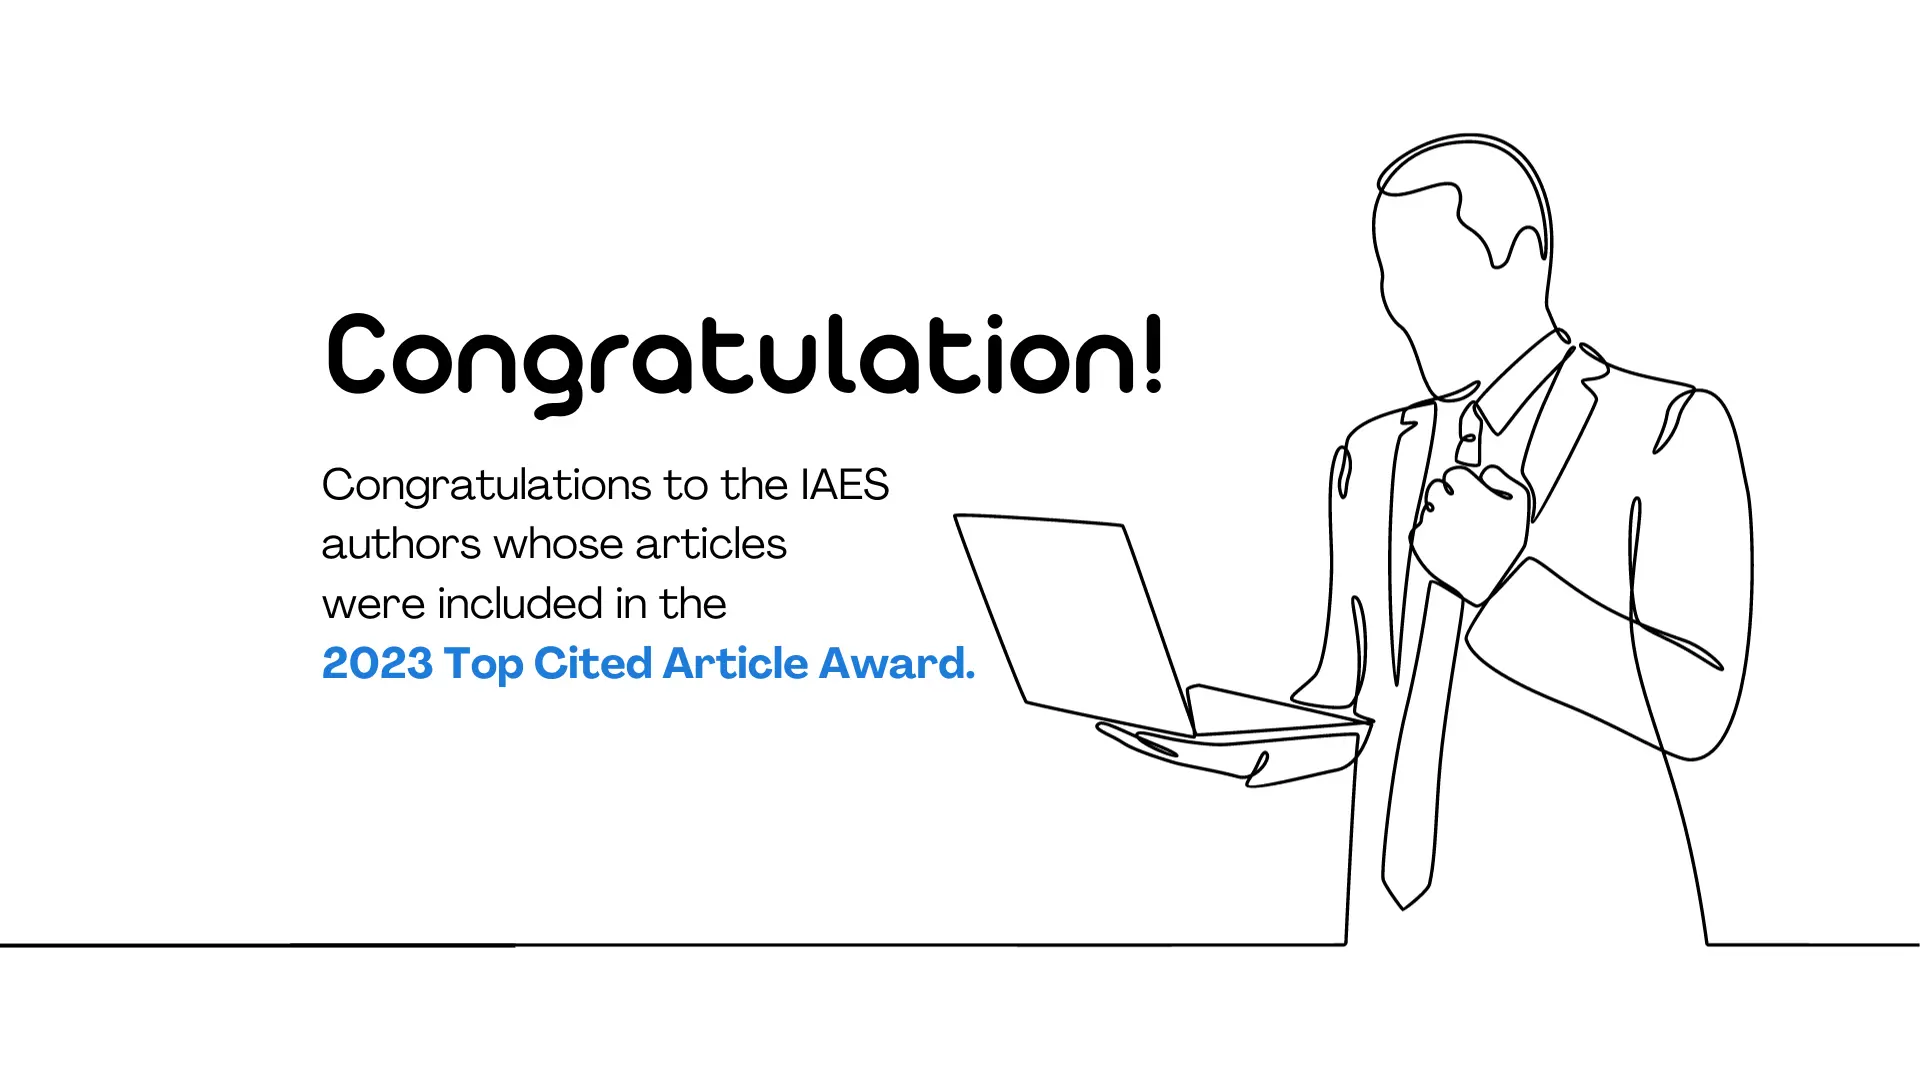 IAES most cited article award